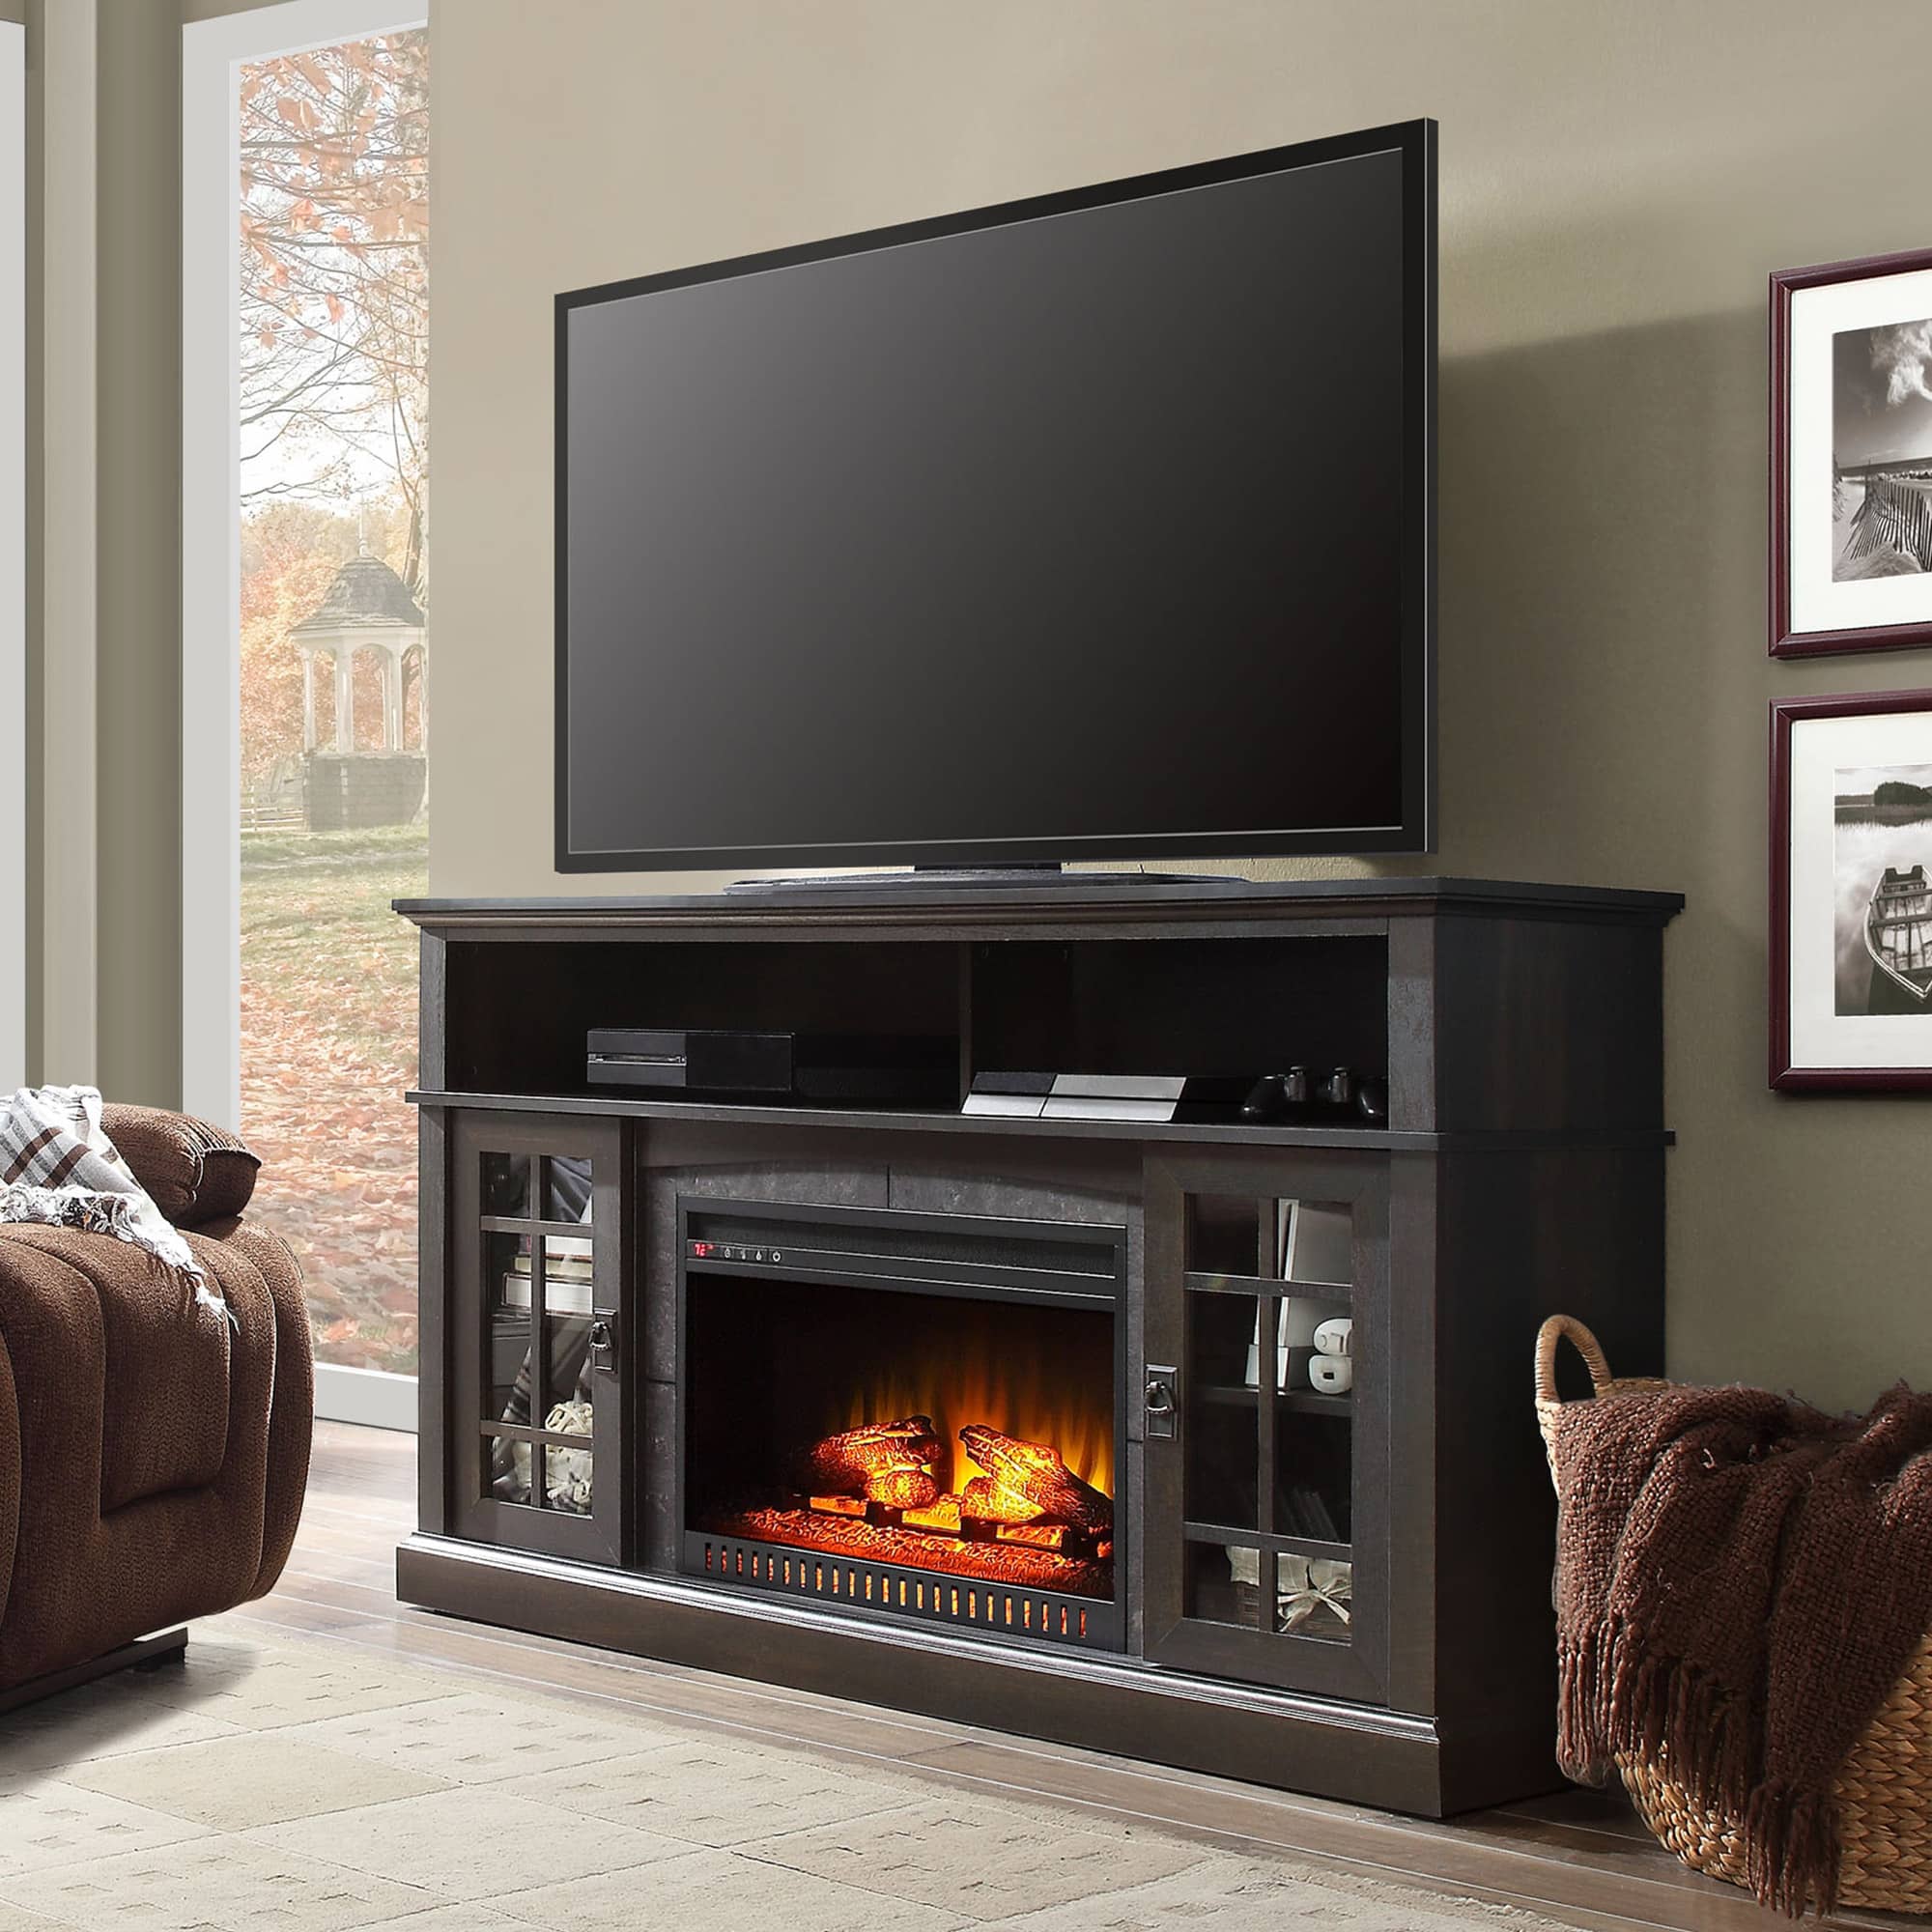 How To Build A TV Stand With Fireplace